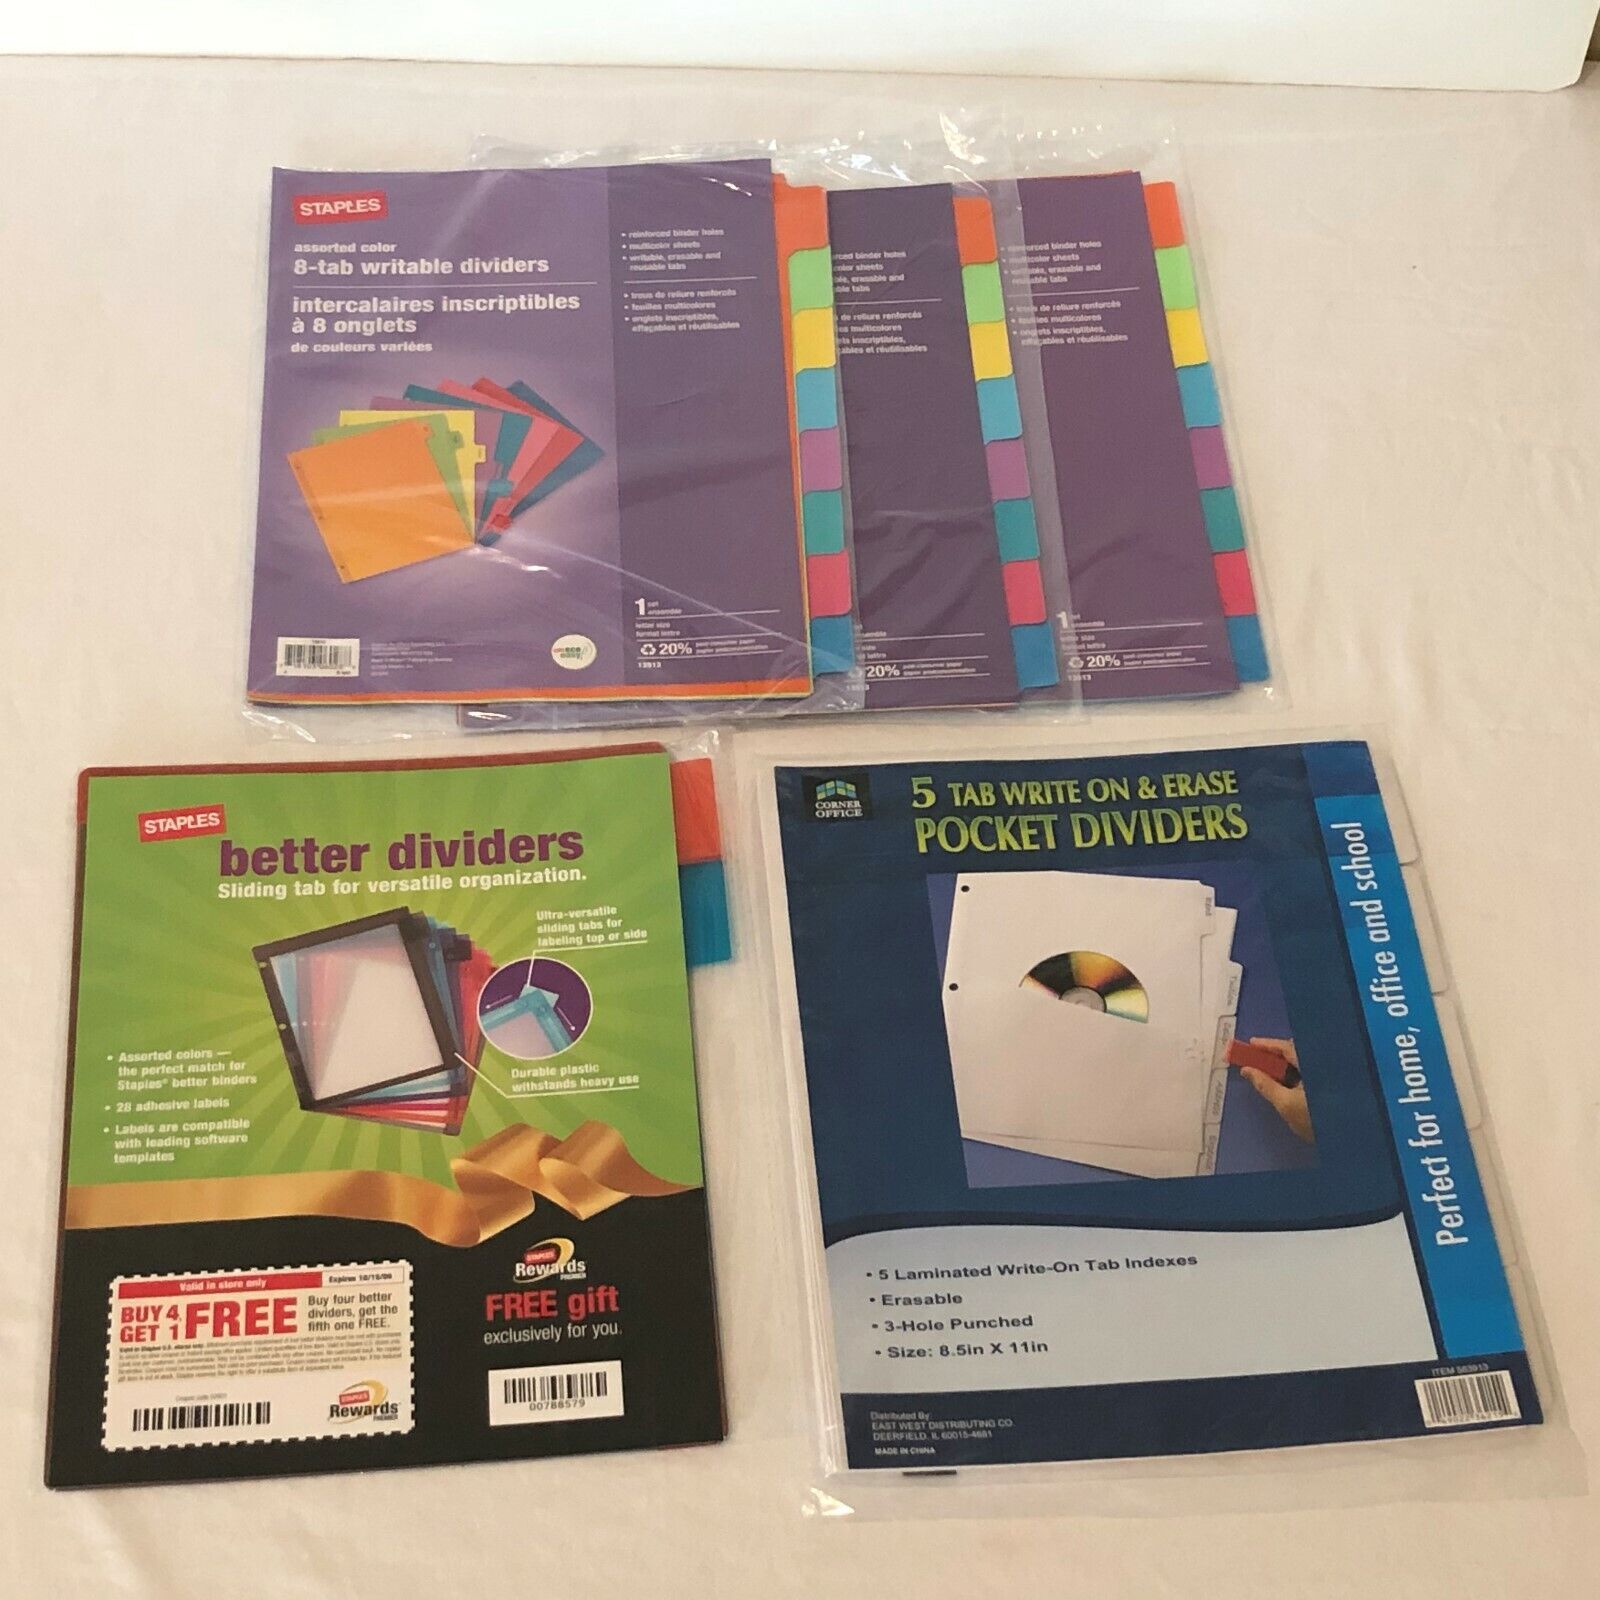 Paper Dividers 8 Tab Writable Colored 5 Tab Write On and Bette...